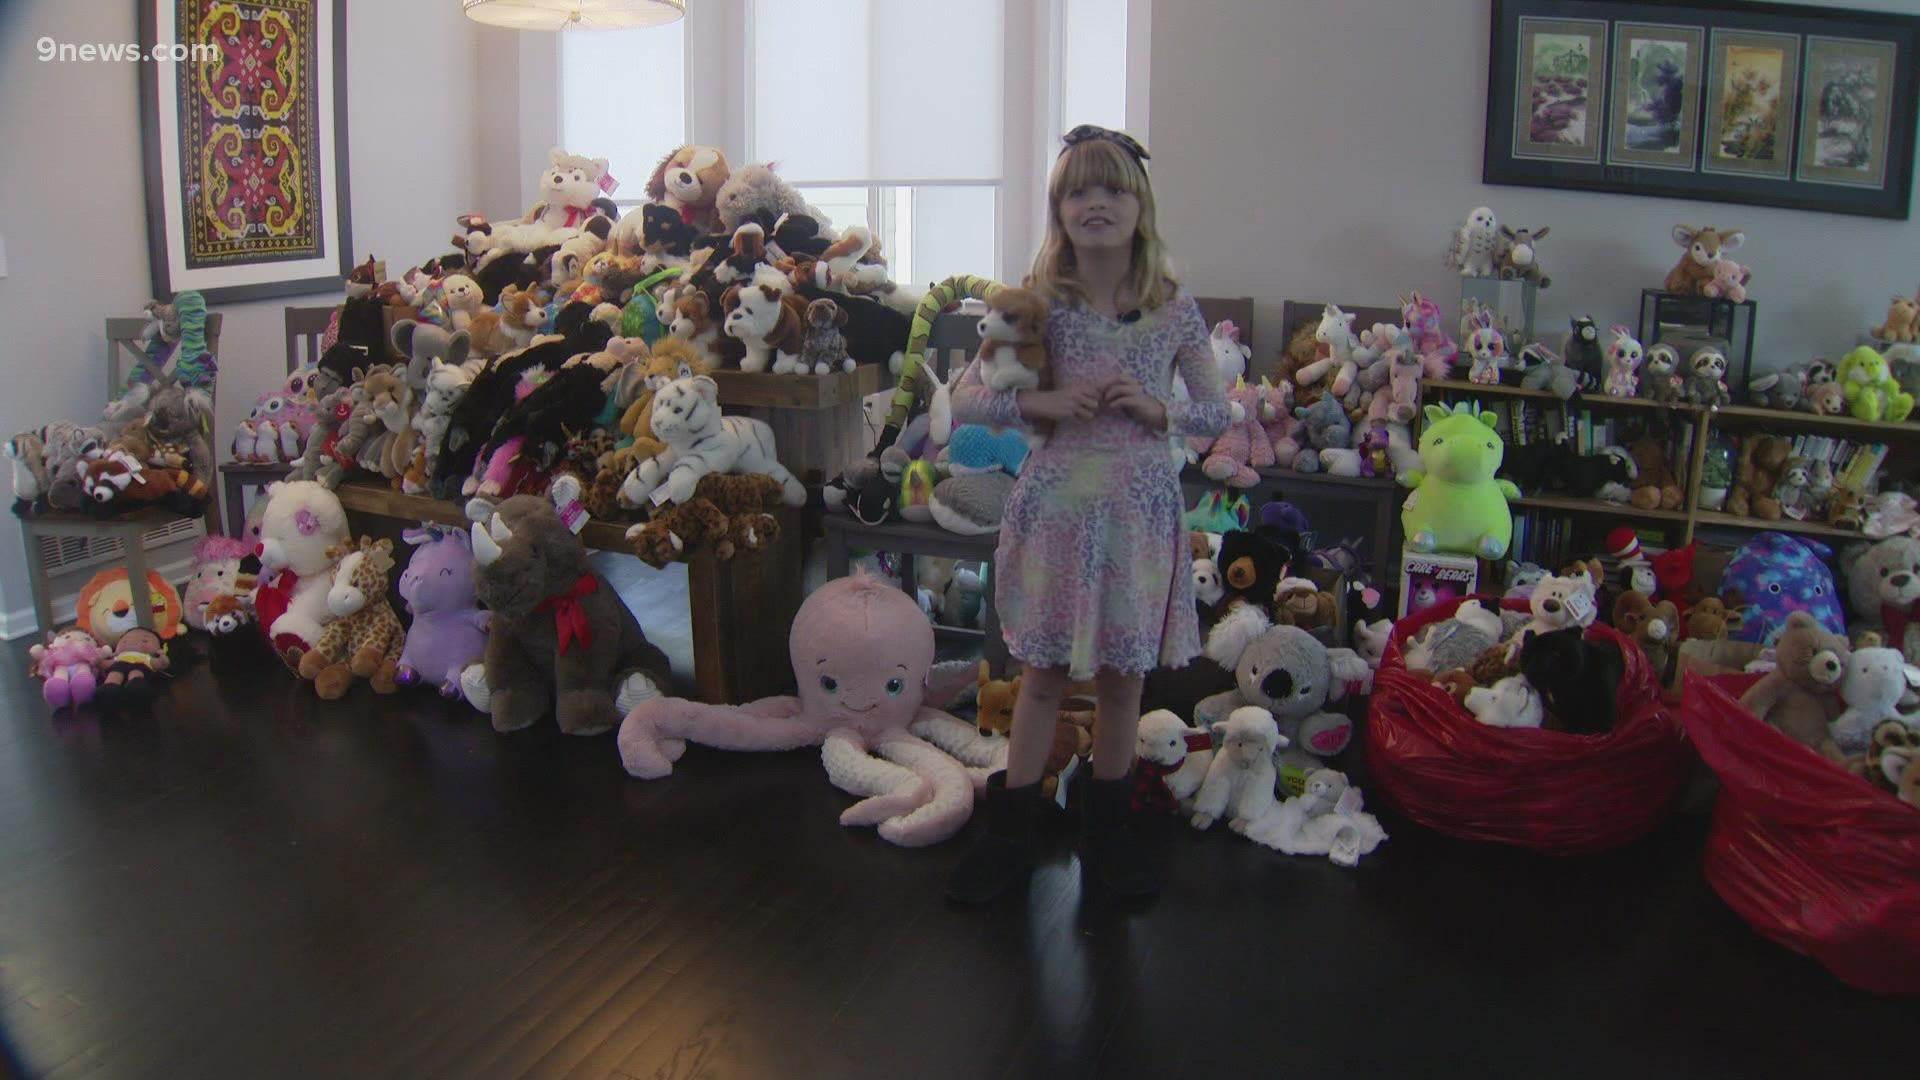 Third grader Libby Latham and her family evacuated during the Marshall Fire. Saturday, she collected and gave out hundreds of stuffed animals to survivors.